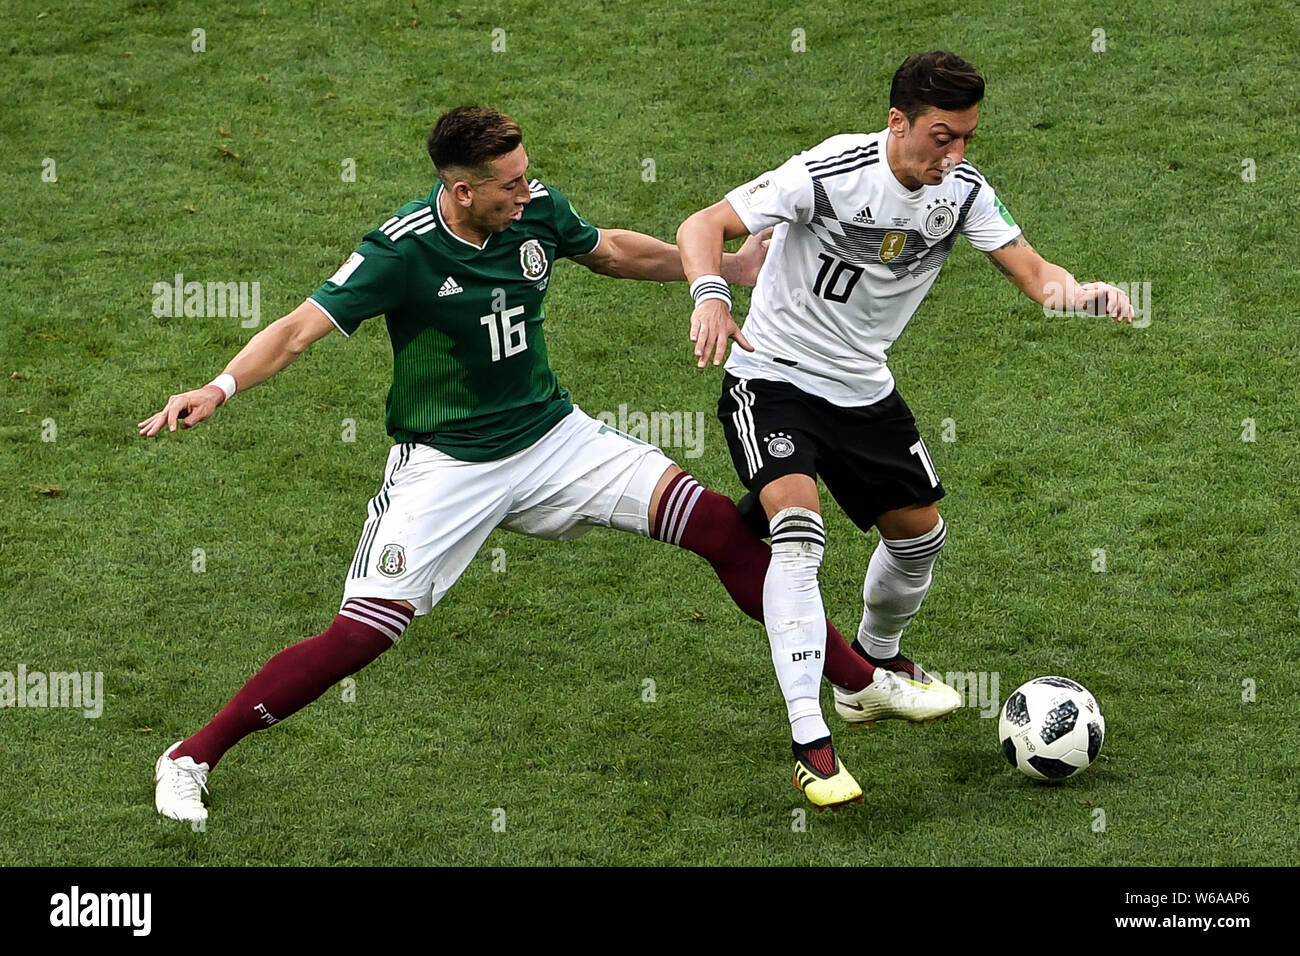 Hector Herrera of Mexico, left, challenges Mesut Oezil (Ozil) of Germany in their Group F match during the FIFA World Cup 2018 in Moscow, Russia, 17 J Stock Photo